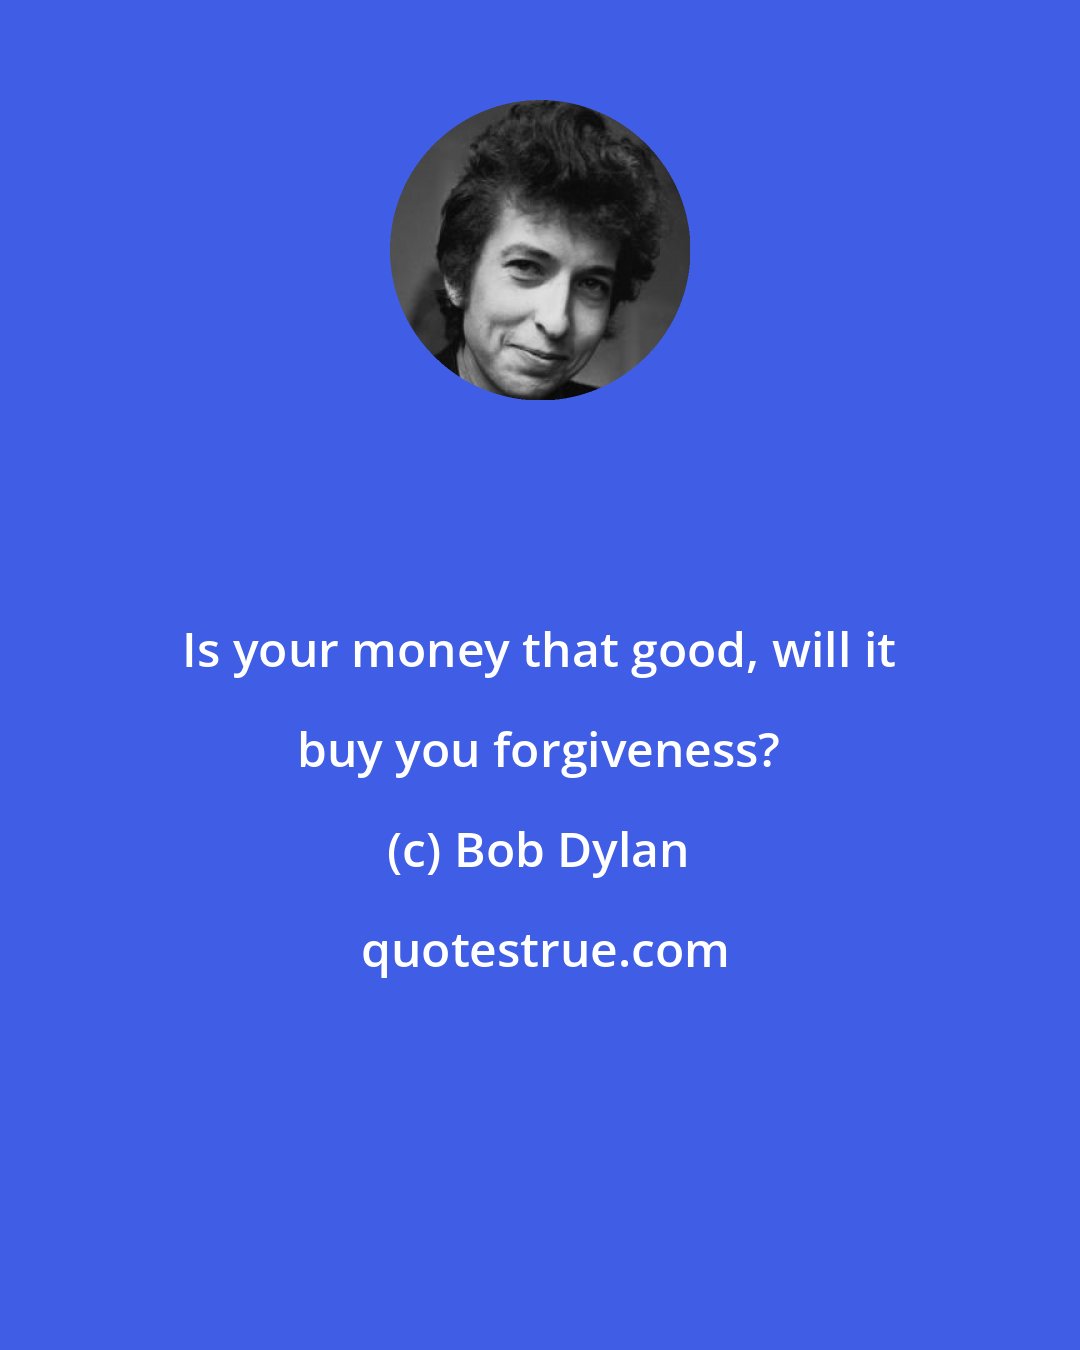 Bob Dylan: Is your money that good, will it buy you forgiveness?